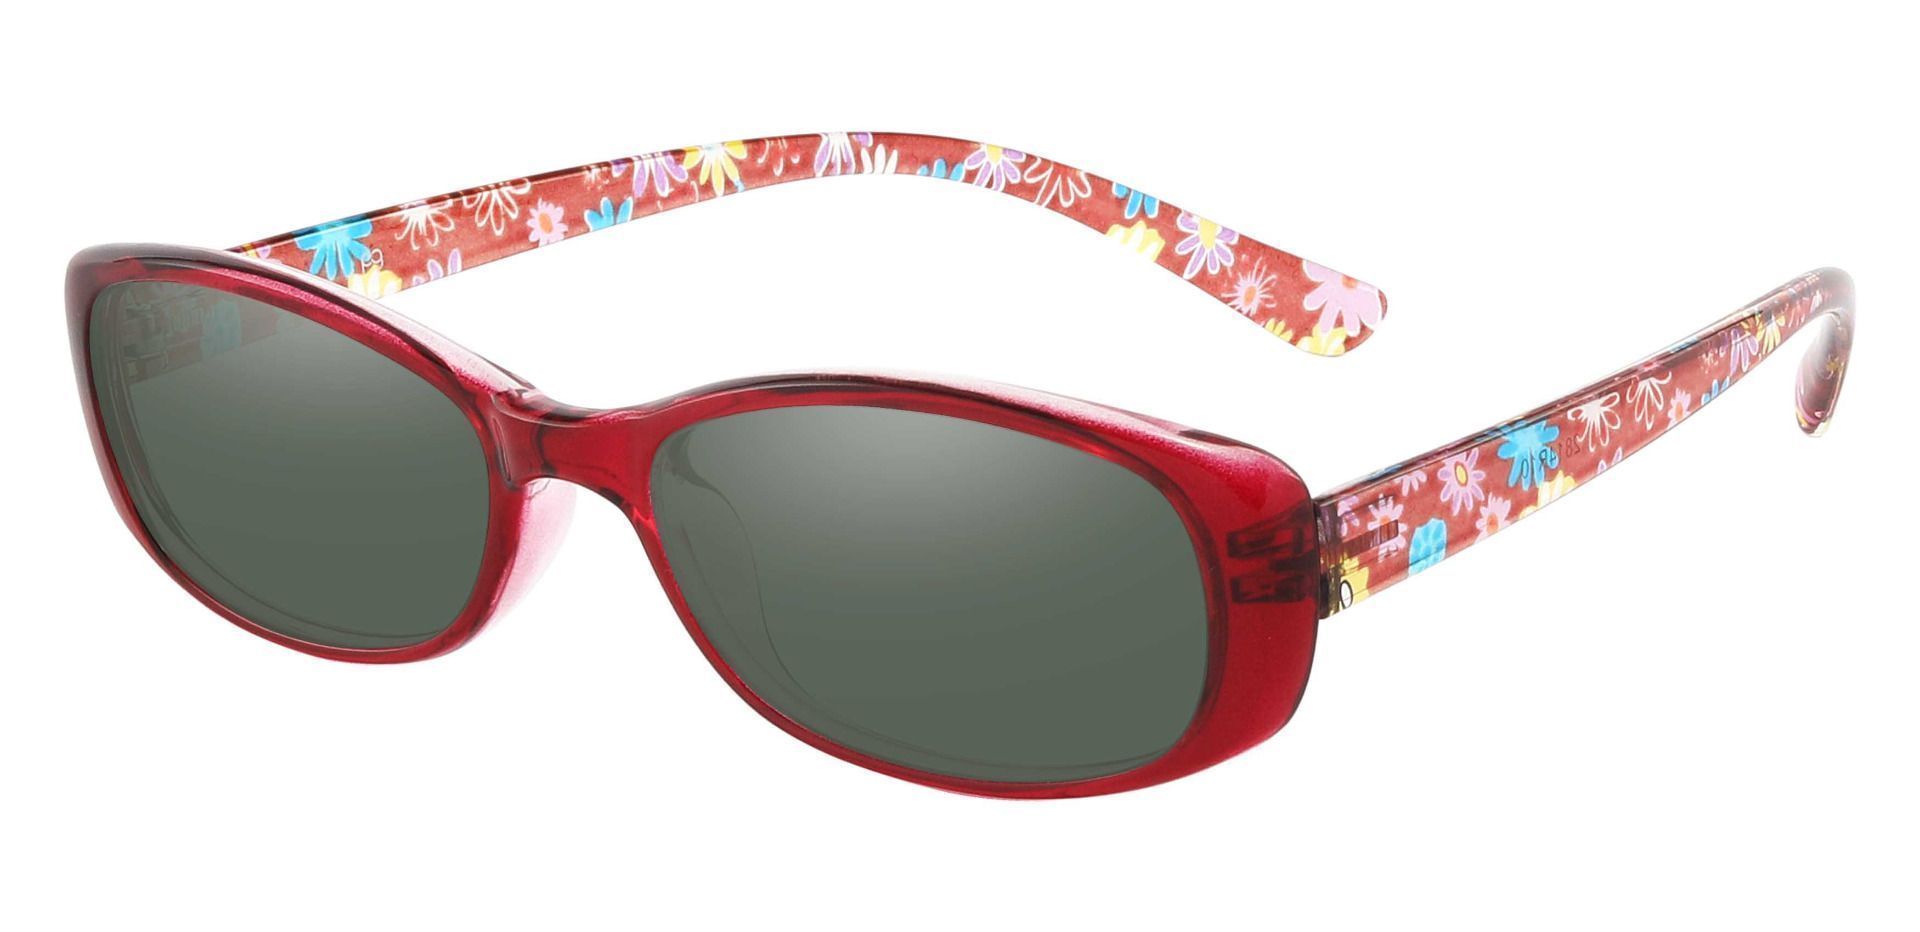 Bethesda Rectangle Non-Rx Sunglasses - Red Frame With Green Lenses